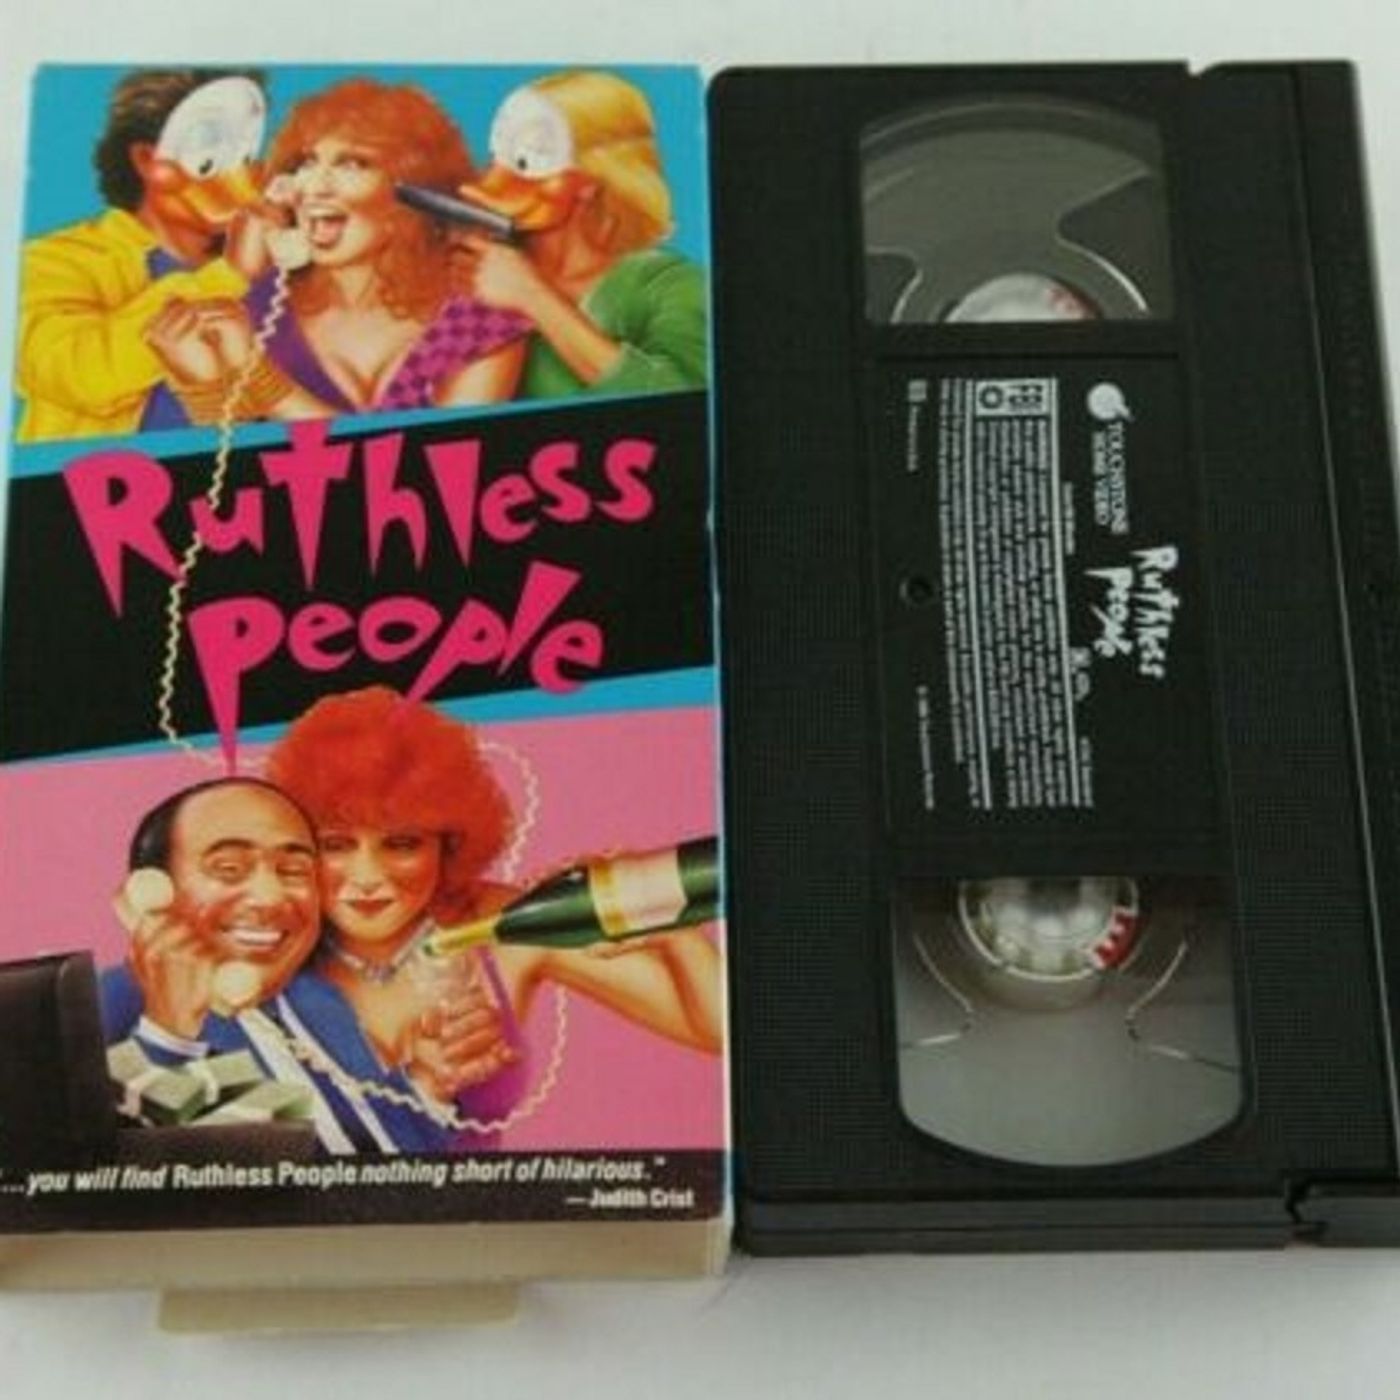 1986 - Ruthless People Image